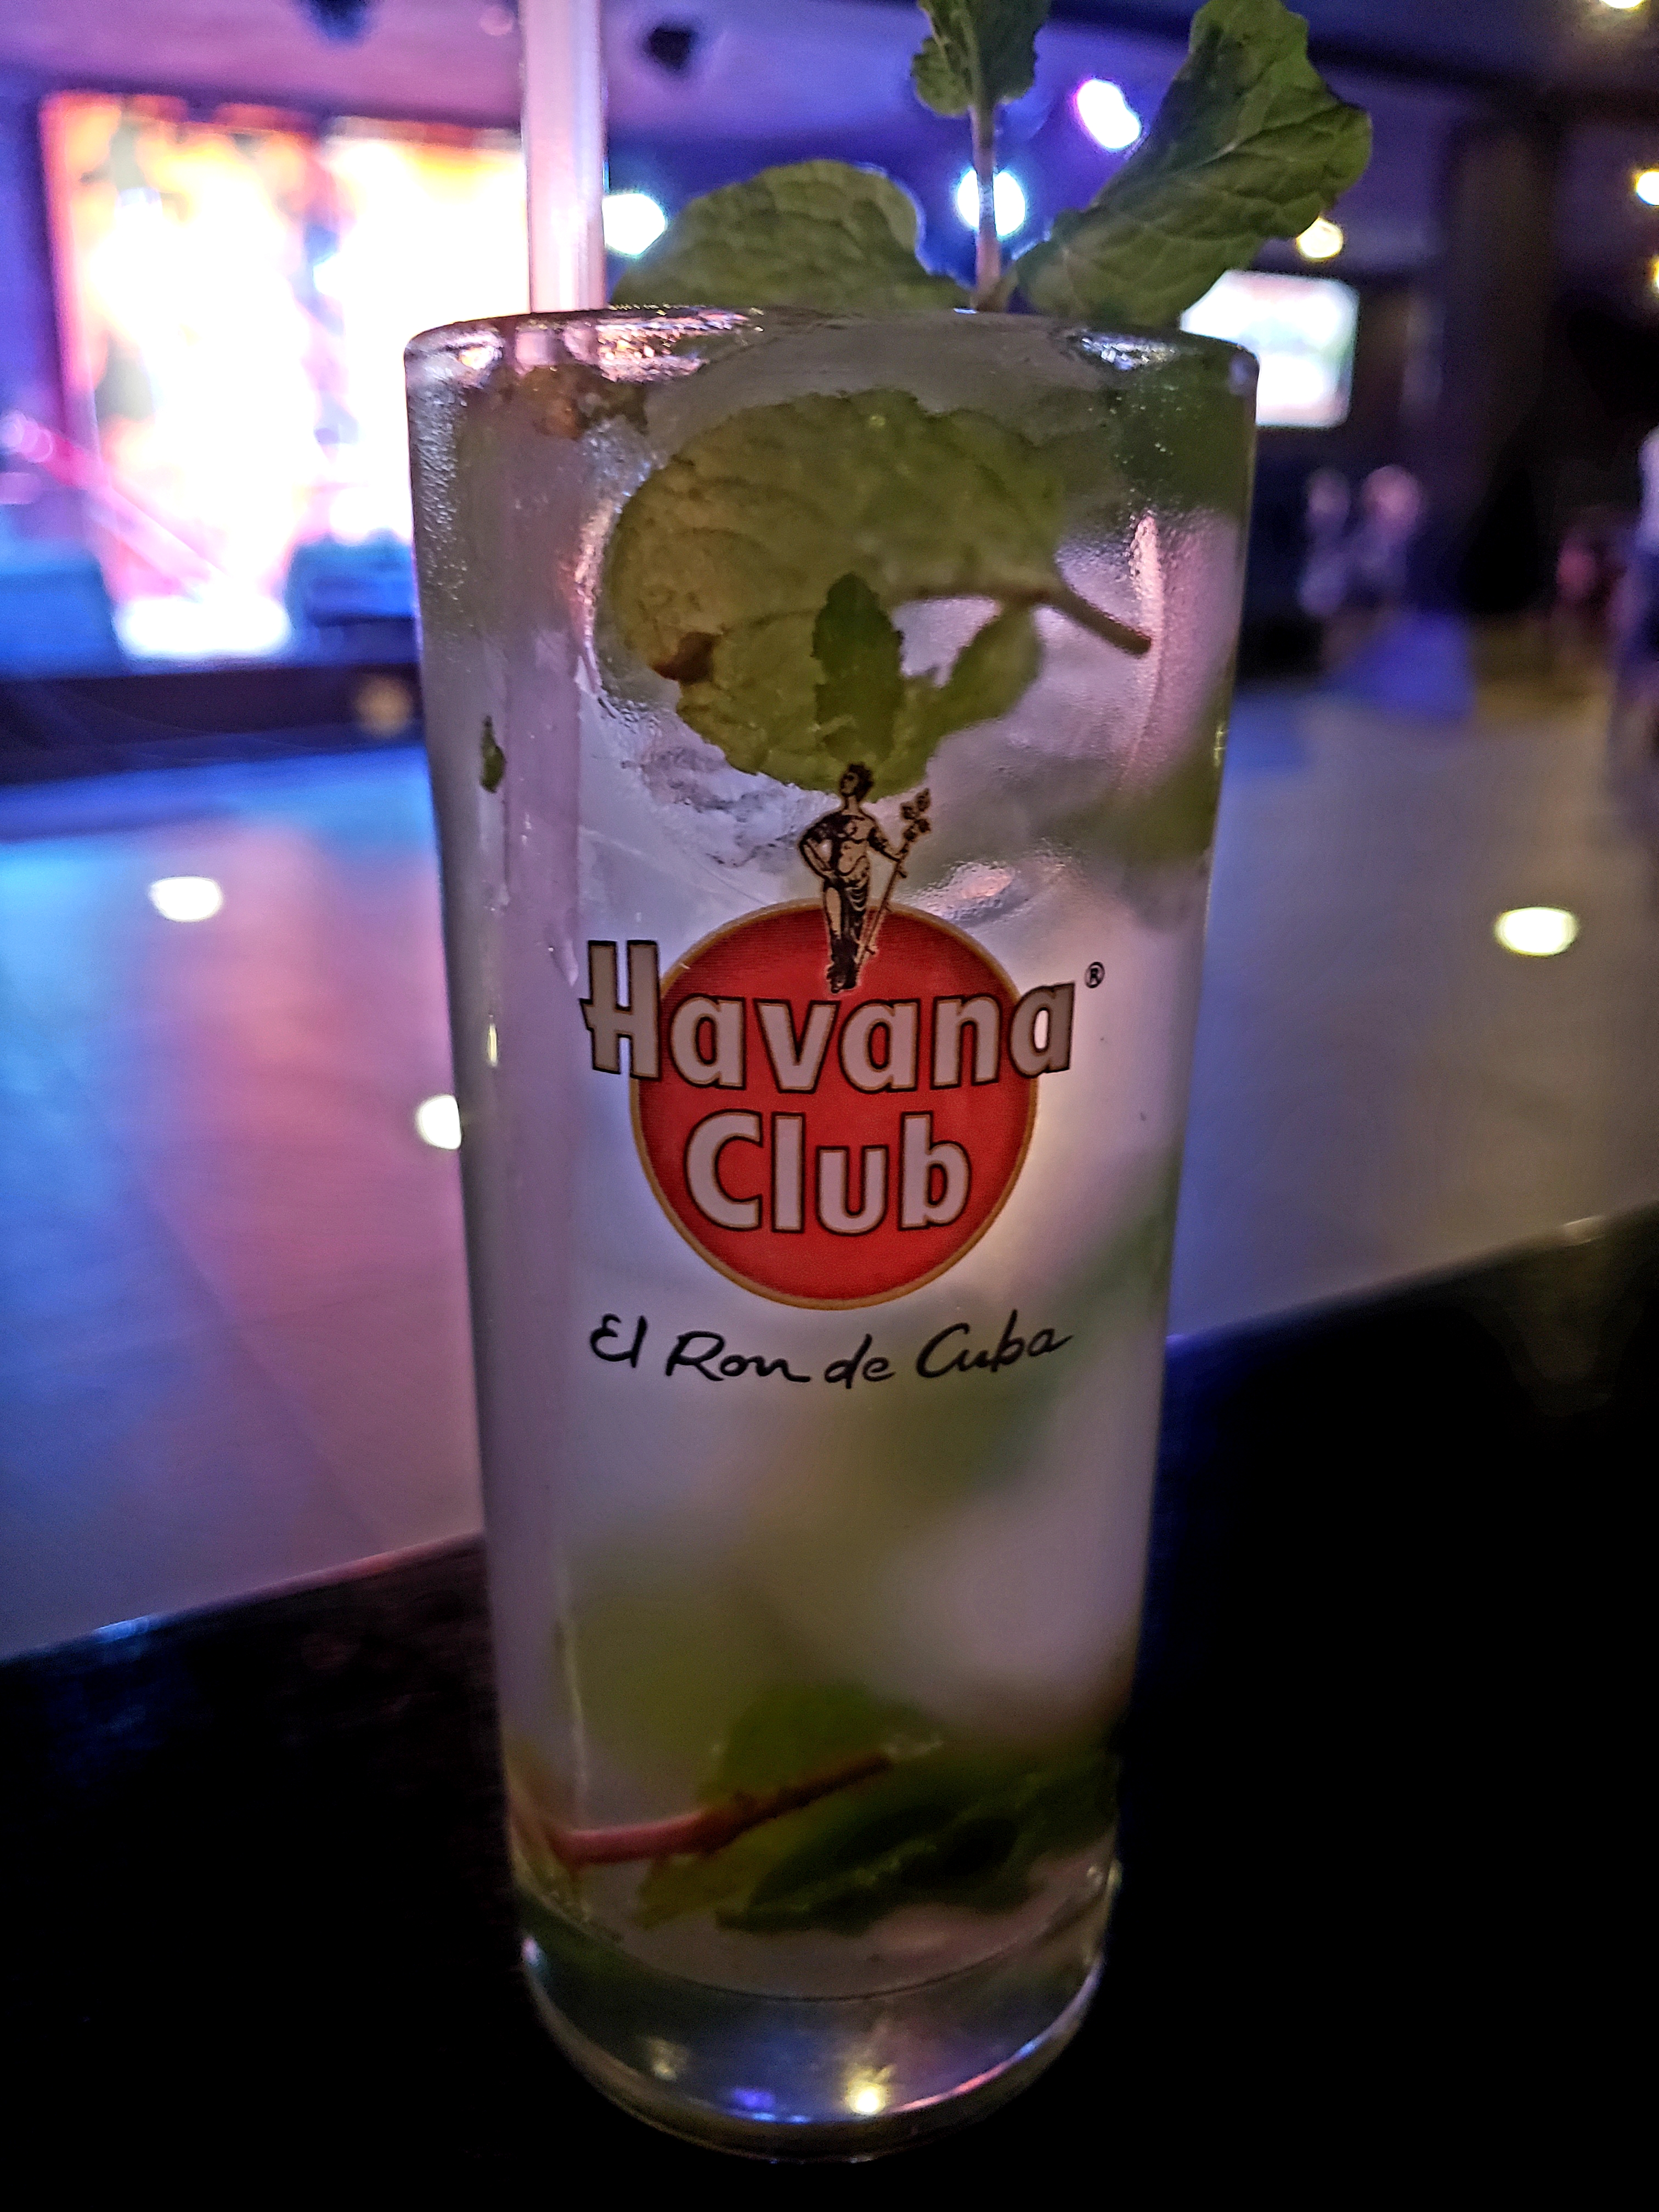 Do not miss the mojito in Cuba. Yes, it is that good!